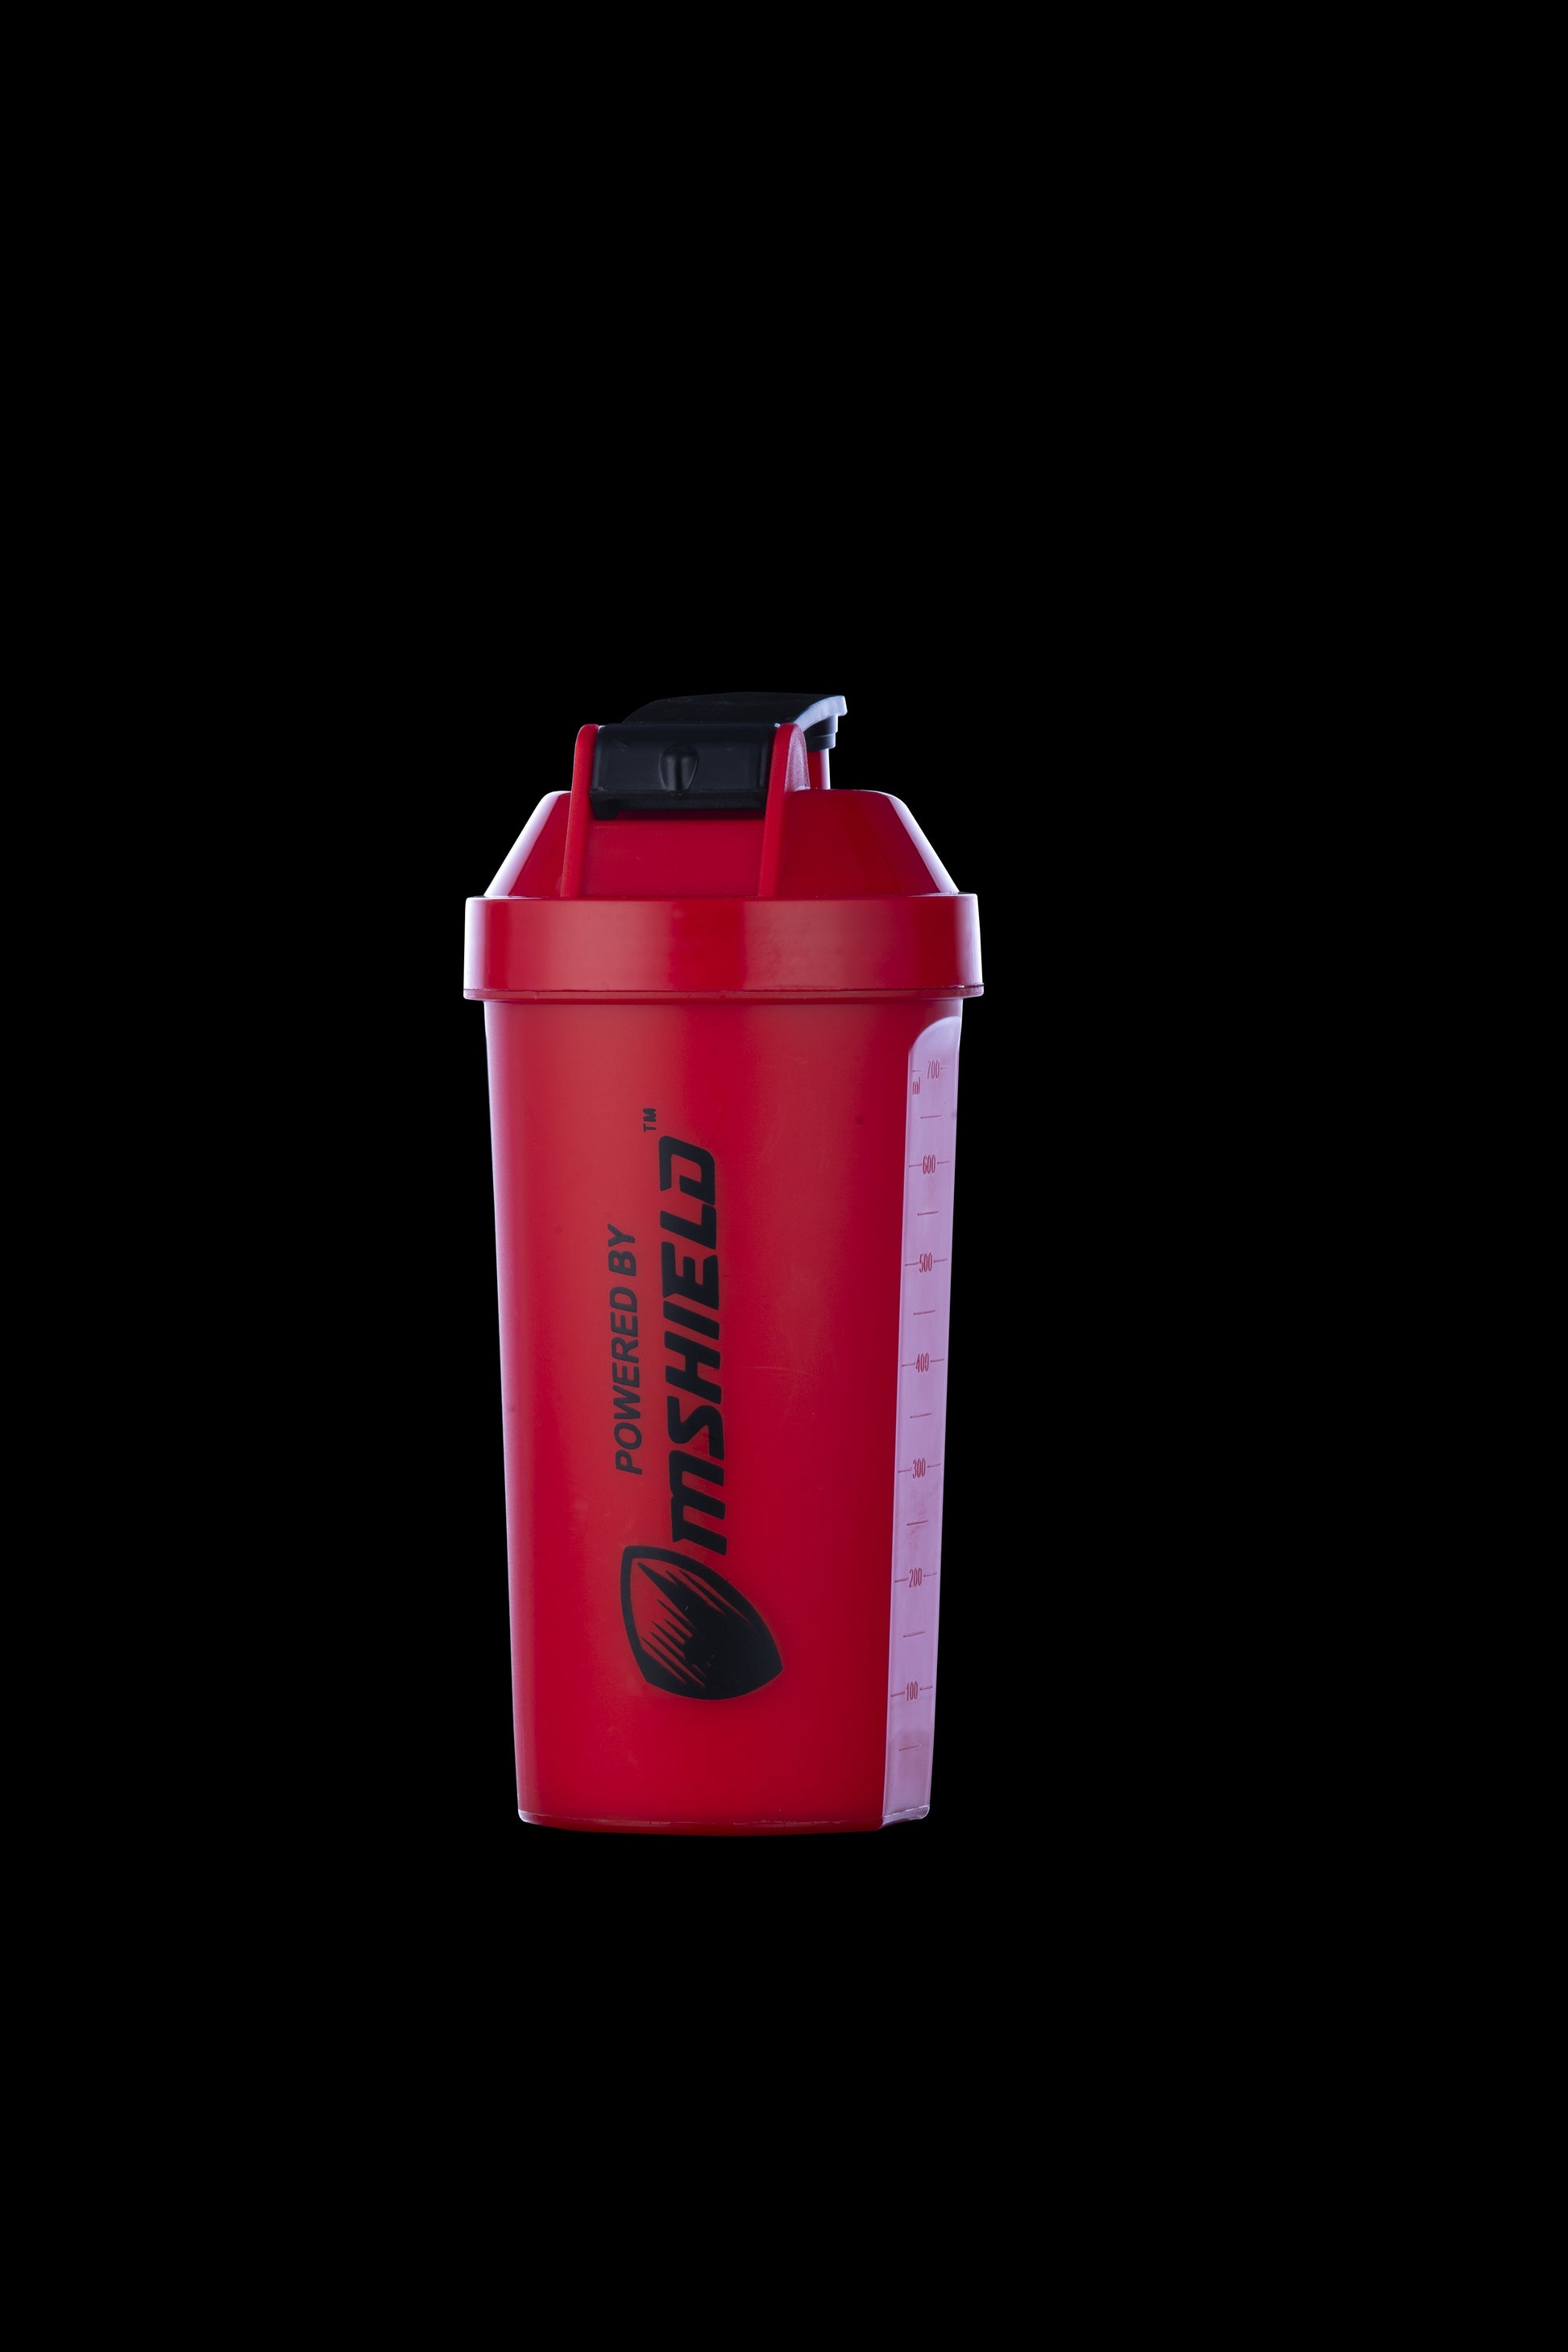 Durable Red Protein Shaker Bottle - Perfect for Gym Workouts and Fitness Routines